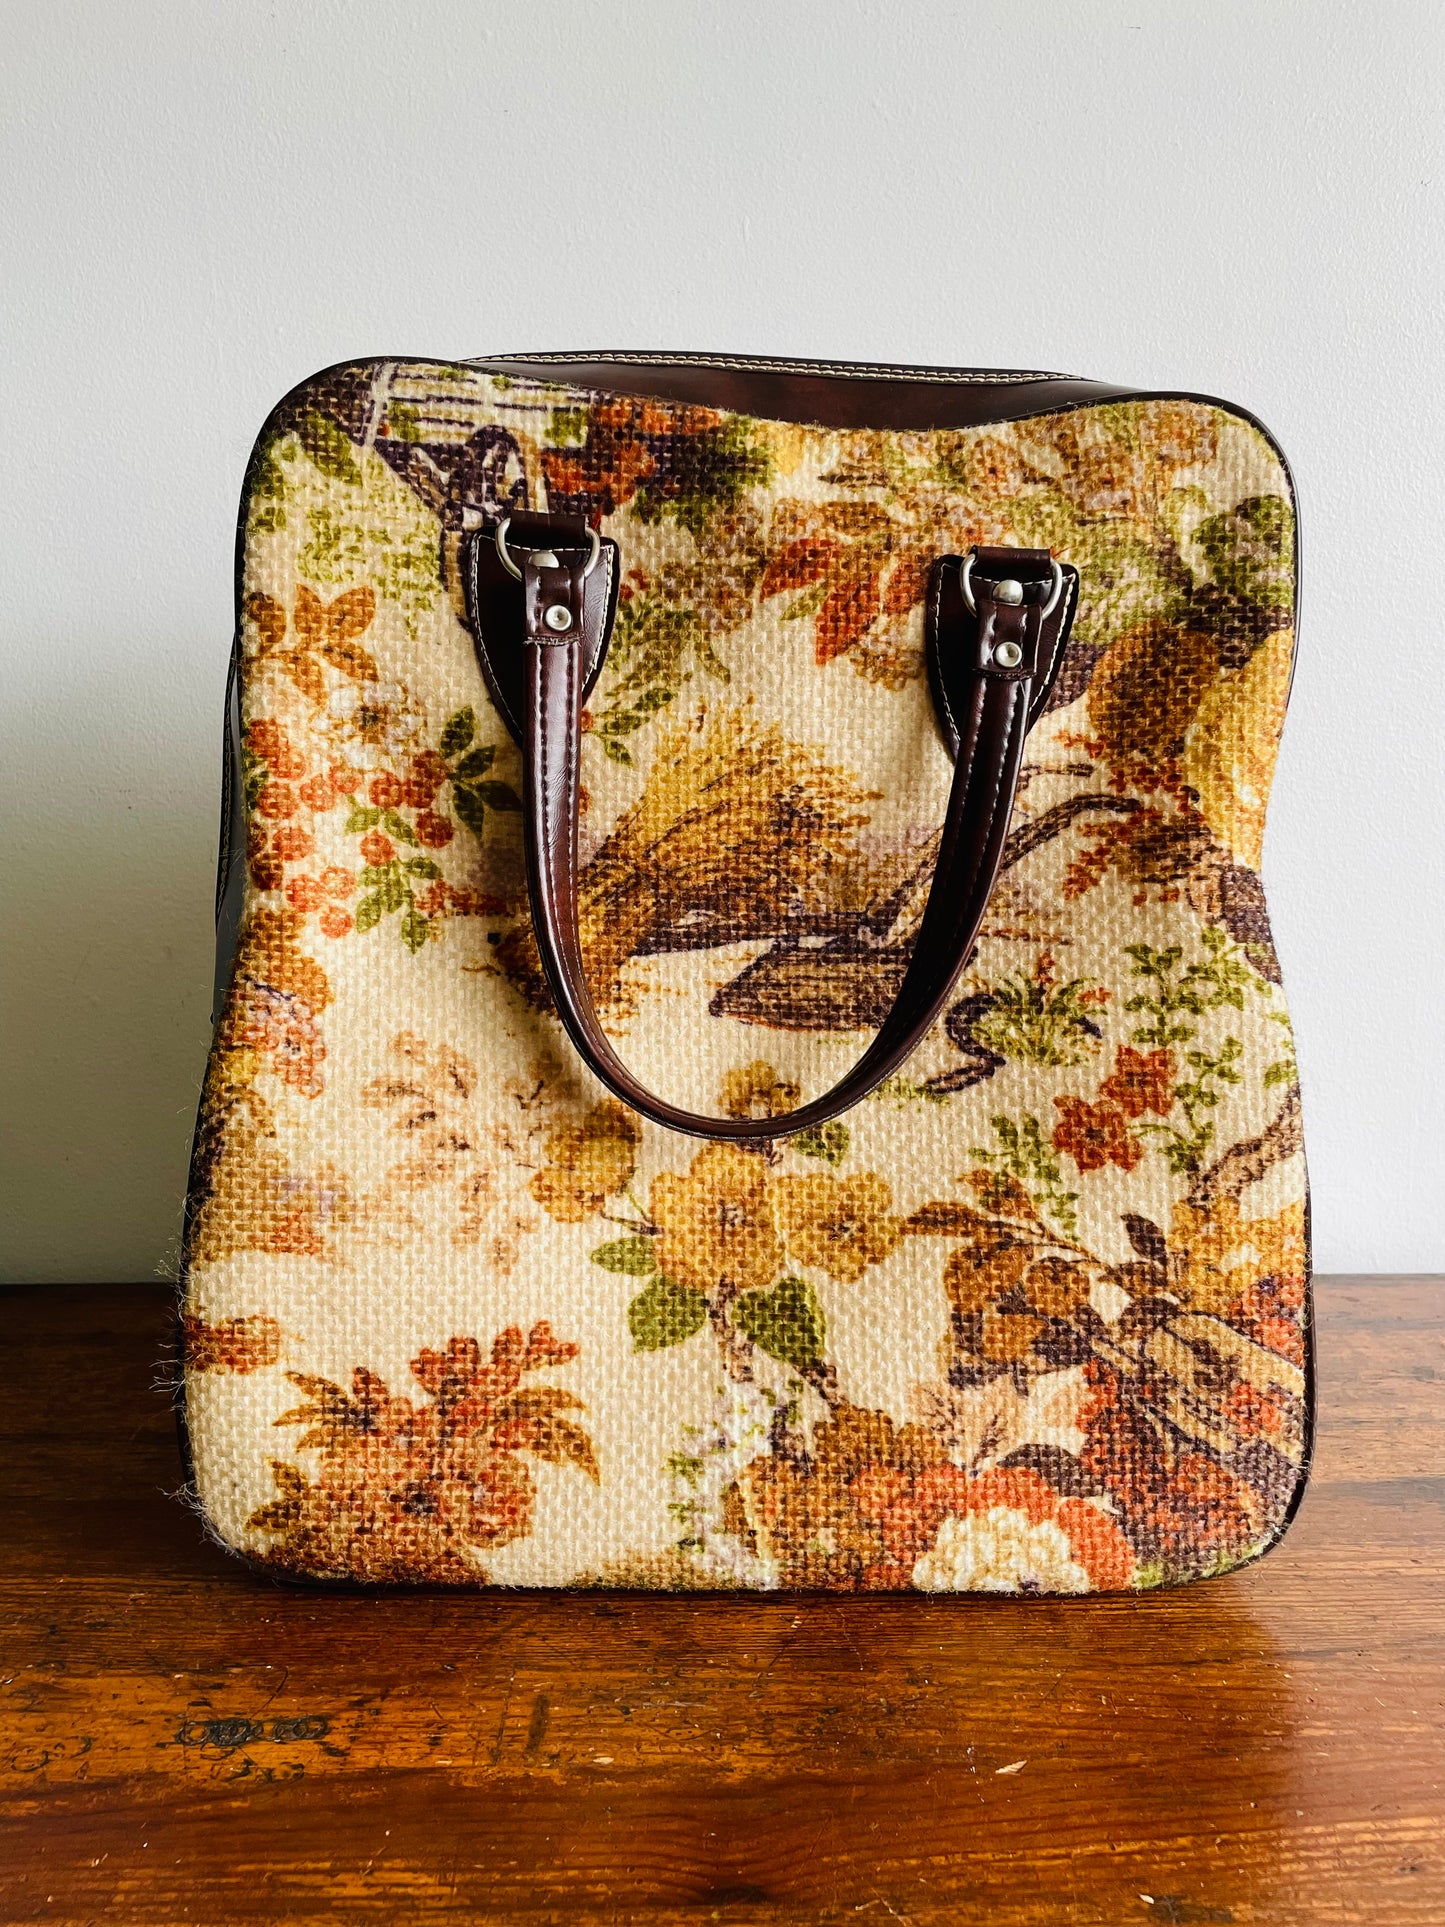 Weekender Carry-On Purse Bag with Autumn Harvest Scene